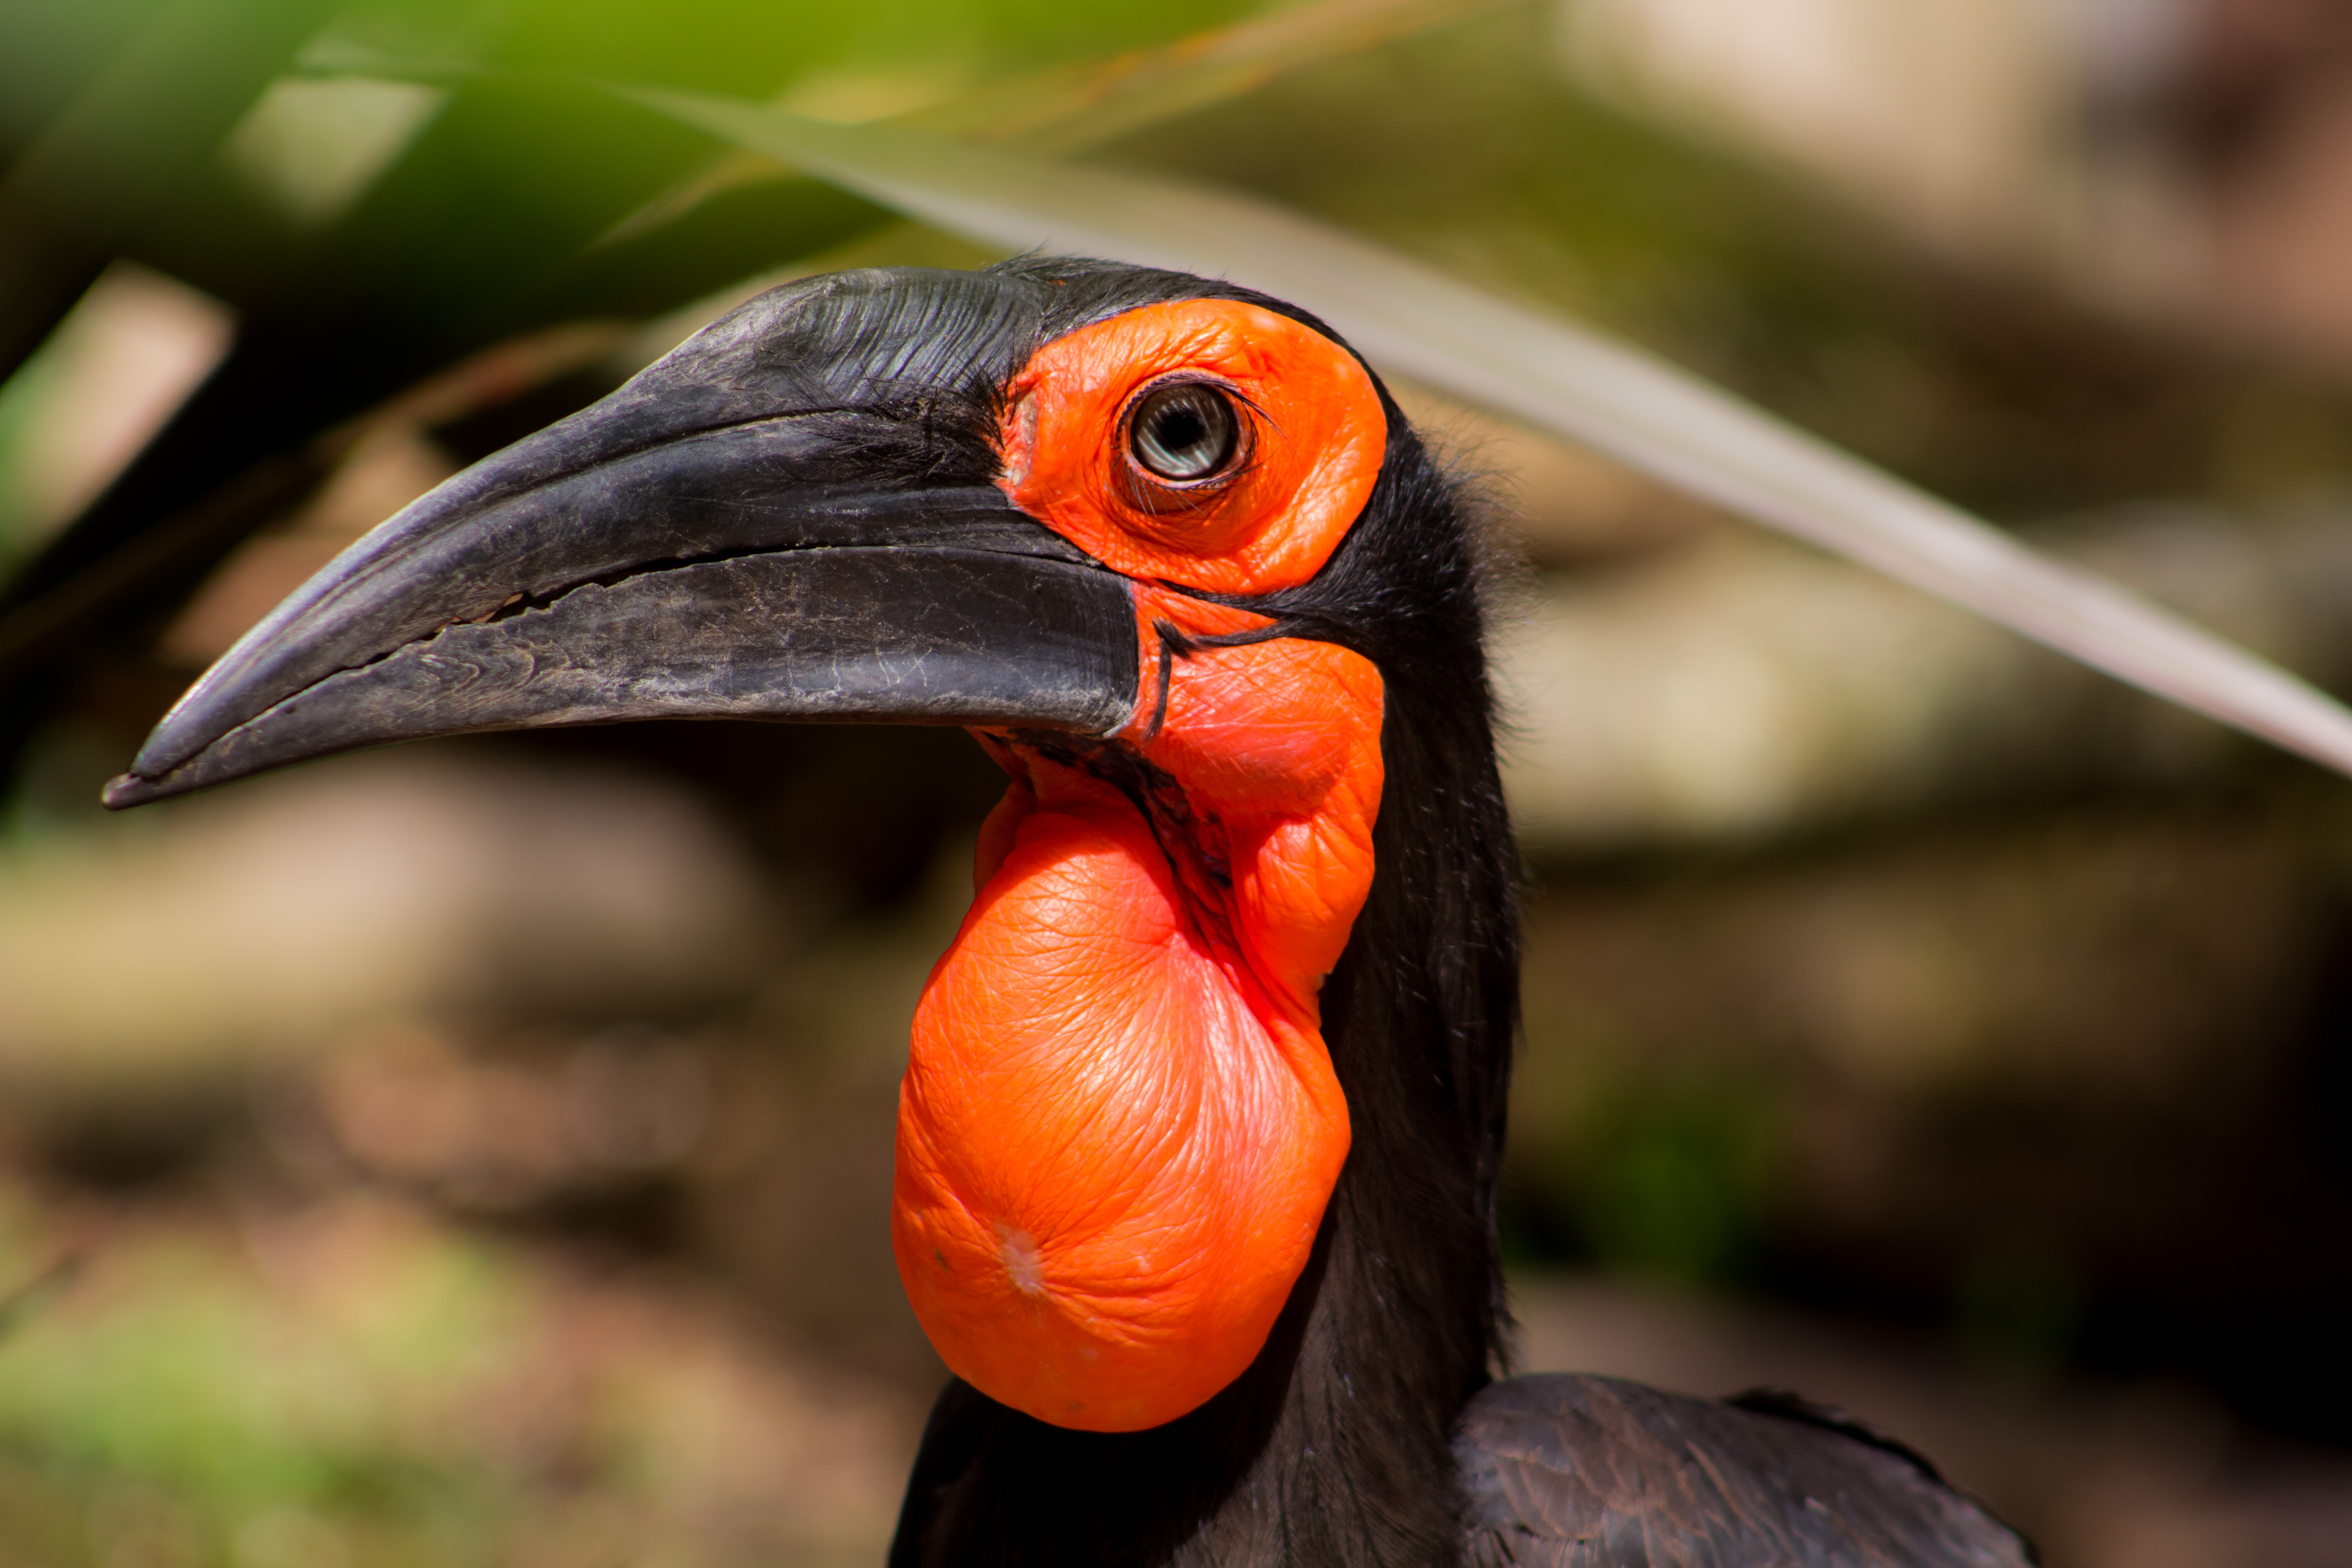 Southern ground hornbill close up at Emerald Park